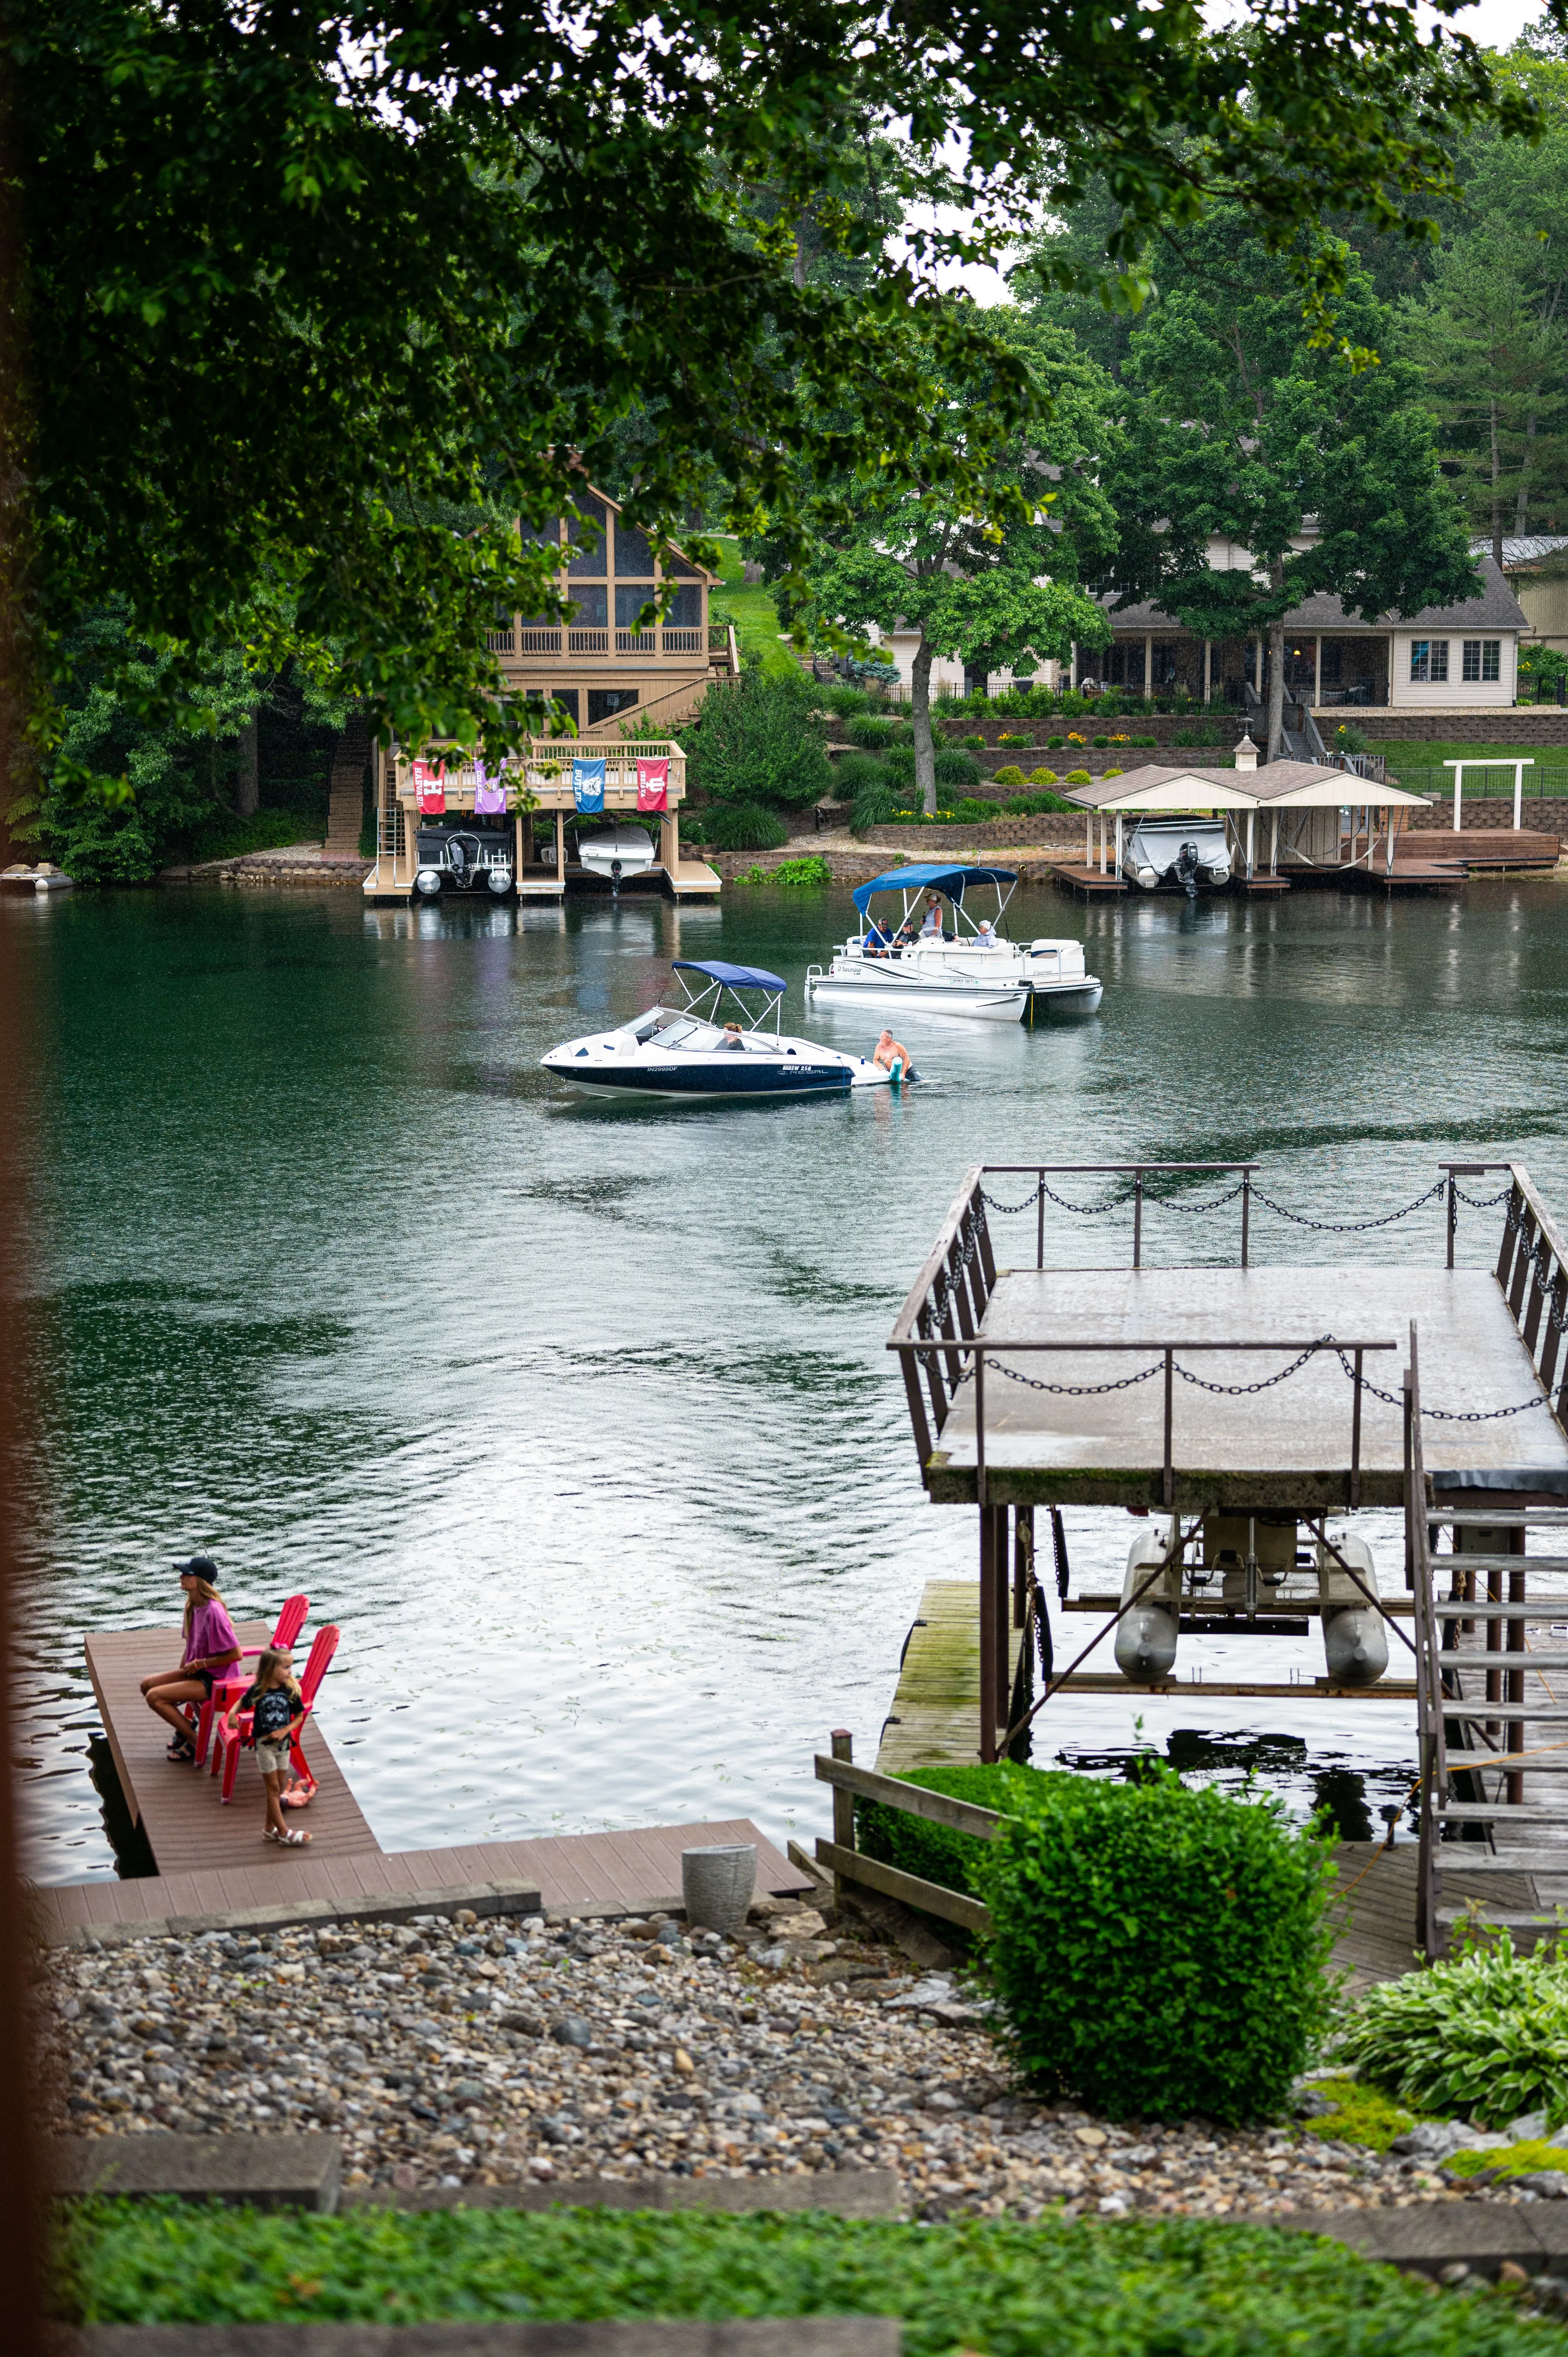 Serene lakeside scene with a boat in the distance, surrounded by greenery and residential buildings, with a wooden staircase leading to the water's edge.